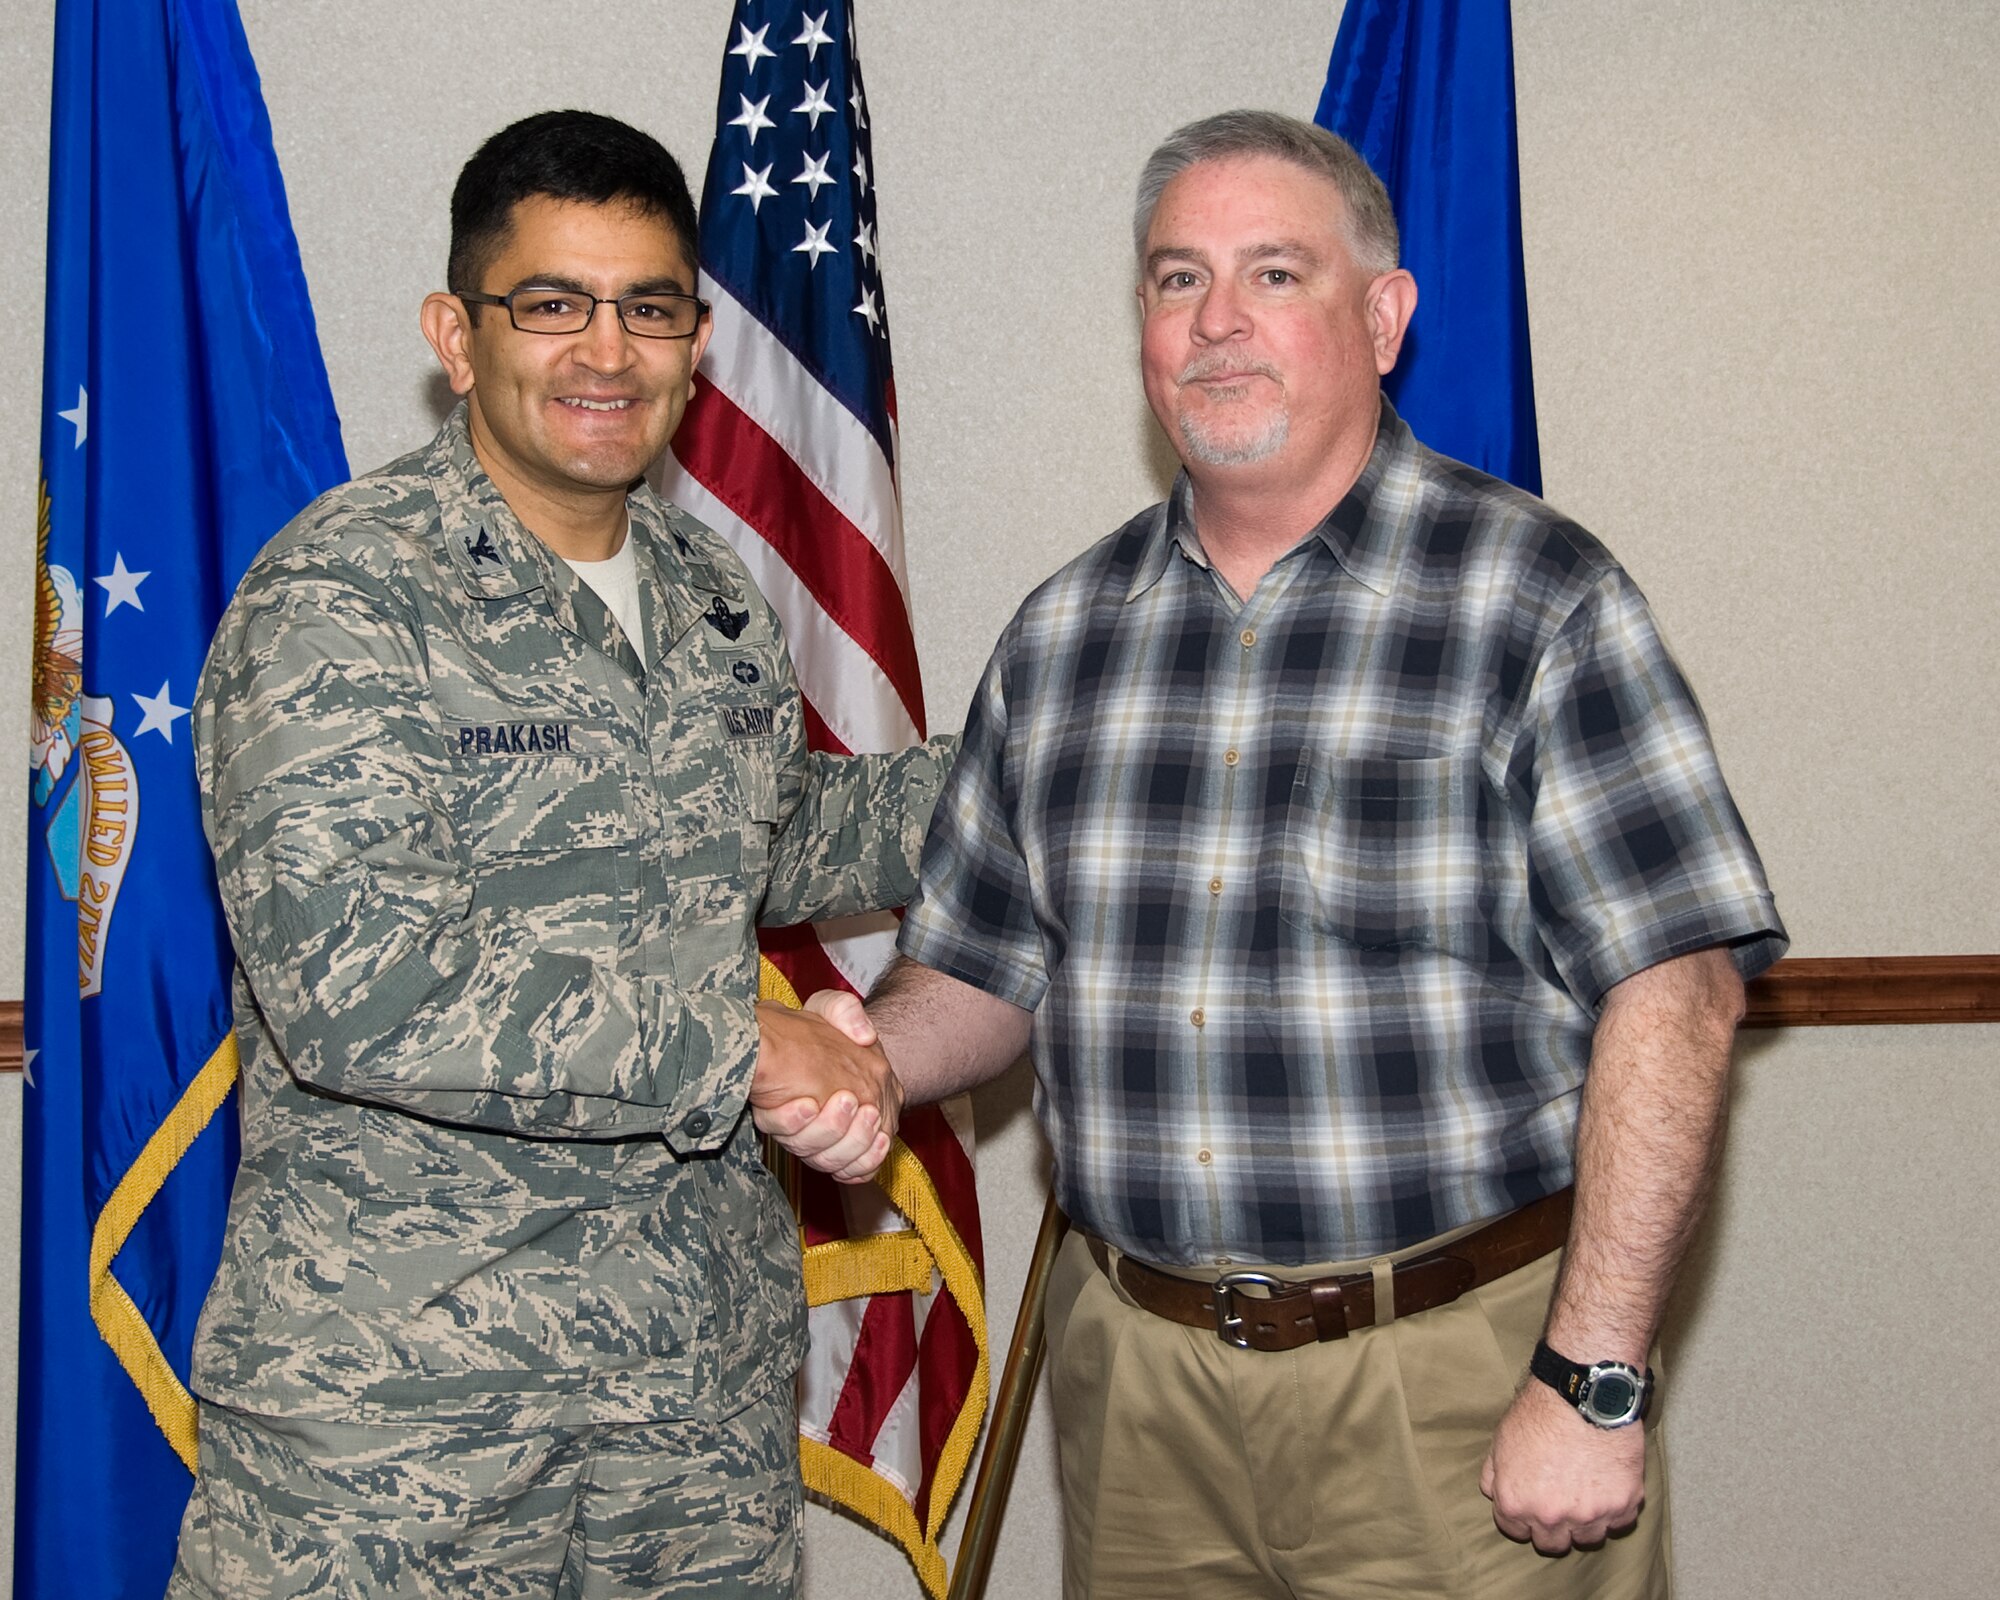 Col. Om Prakash (left), 82nd Training Wing vice-commander, congratulates James Jett, 82nd Training Wing Safety, for being named the "Commander's Wingman of Choice" for Dec. 3-7.  The award is given weekly for outstanding duty performance. (U.S. Air Force photo/Frank Carter)